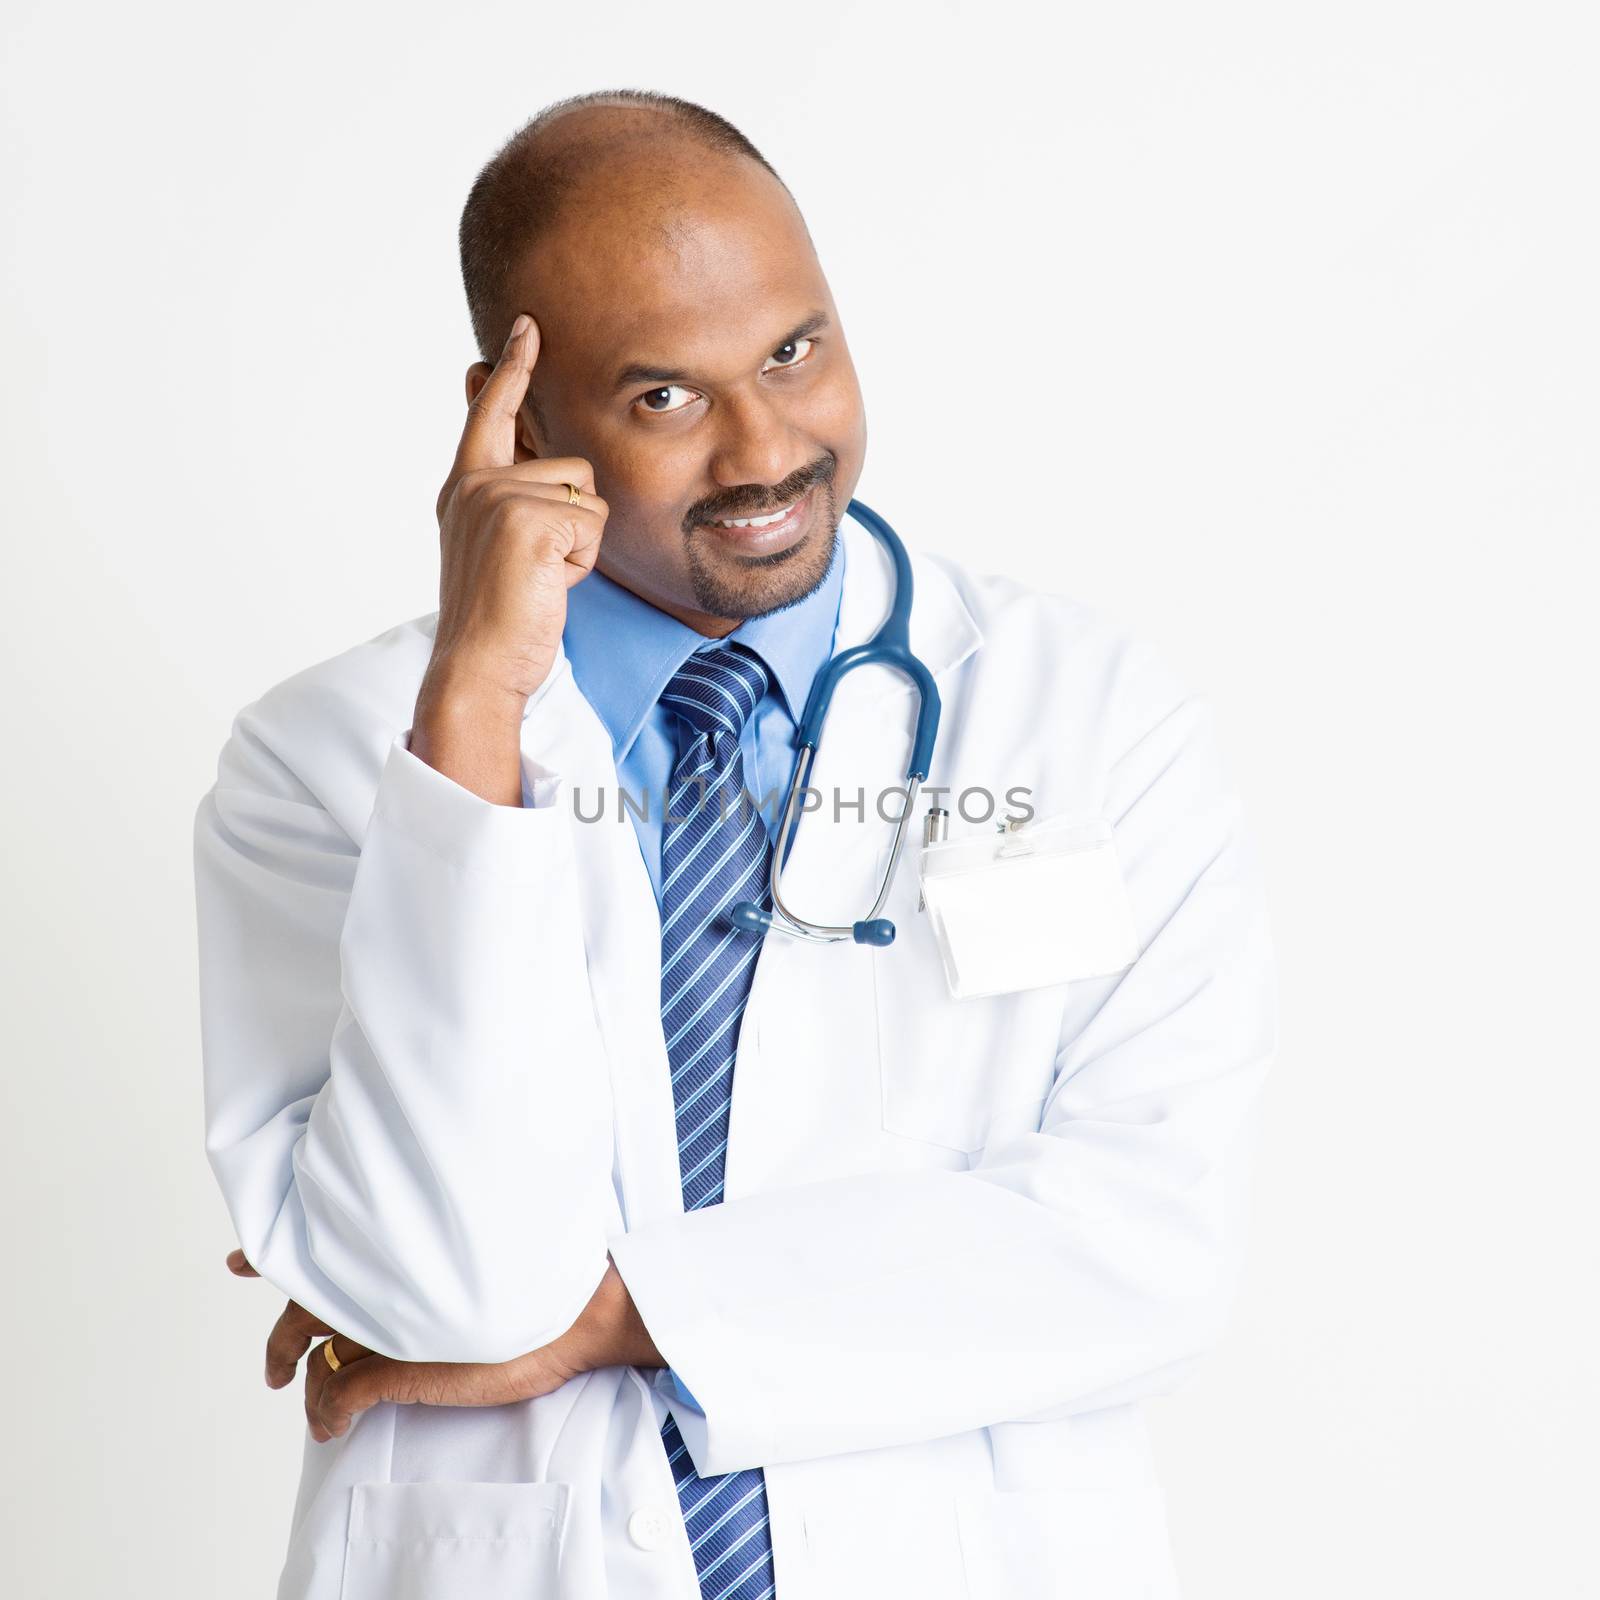 Portrait of mature Indian male medical doctor in uniform thinking, standing on plain background with shadow.